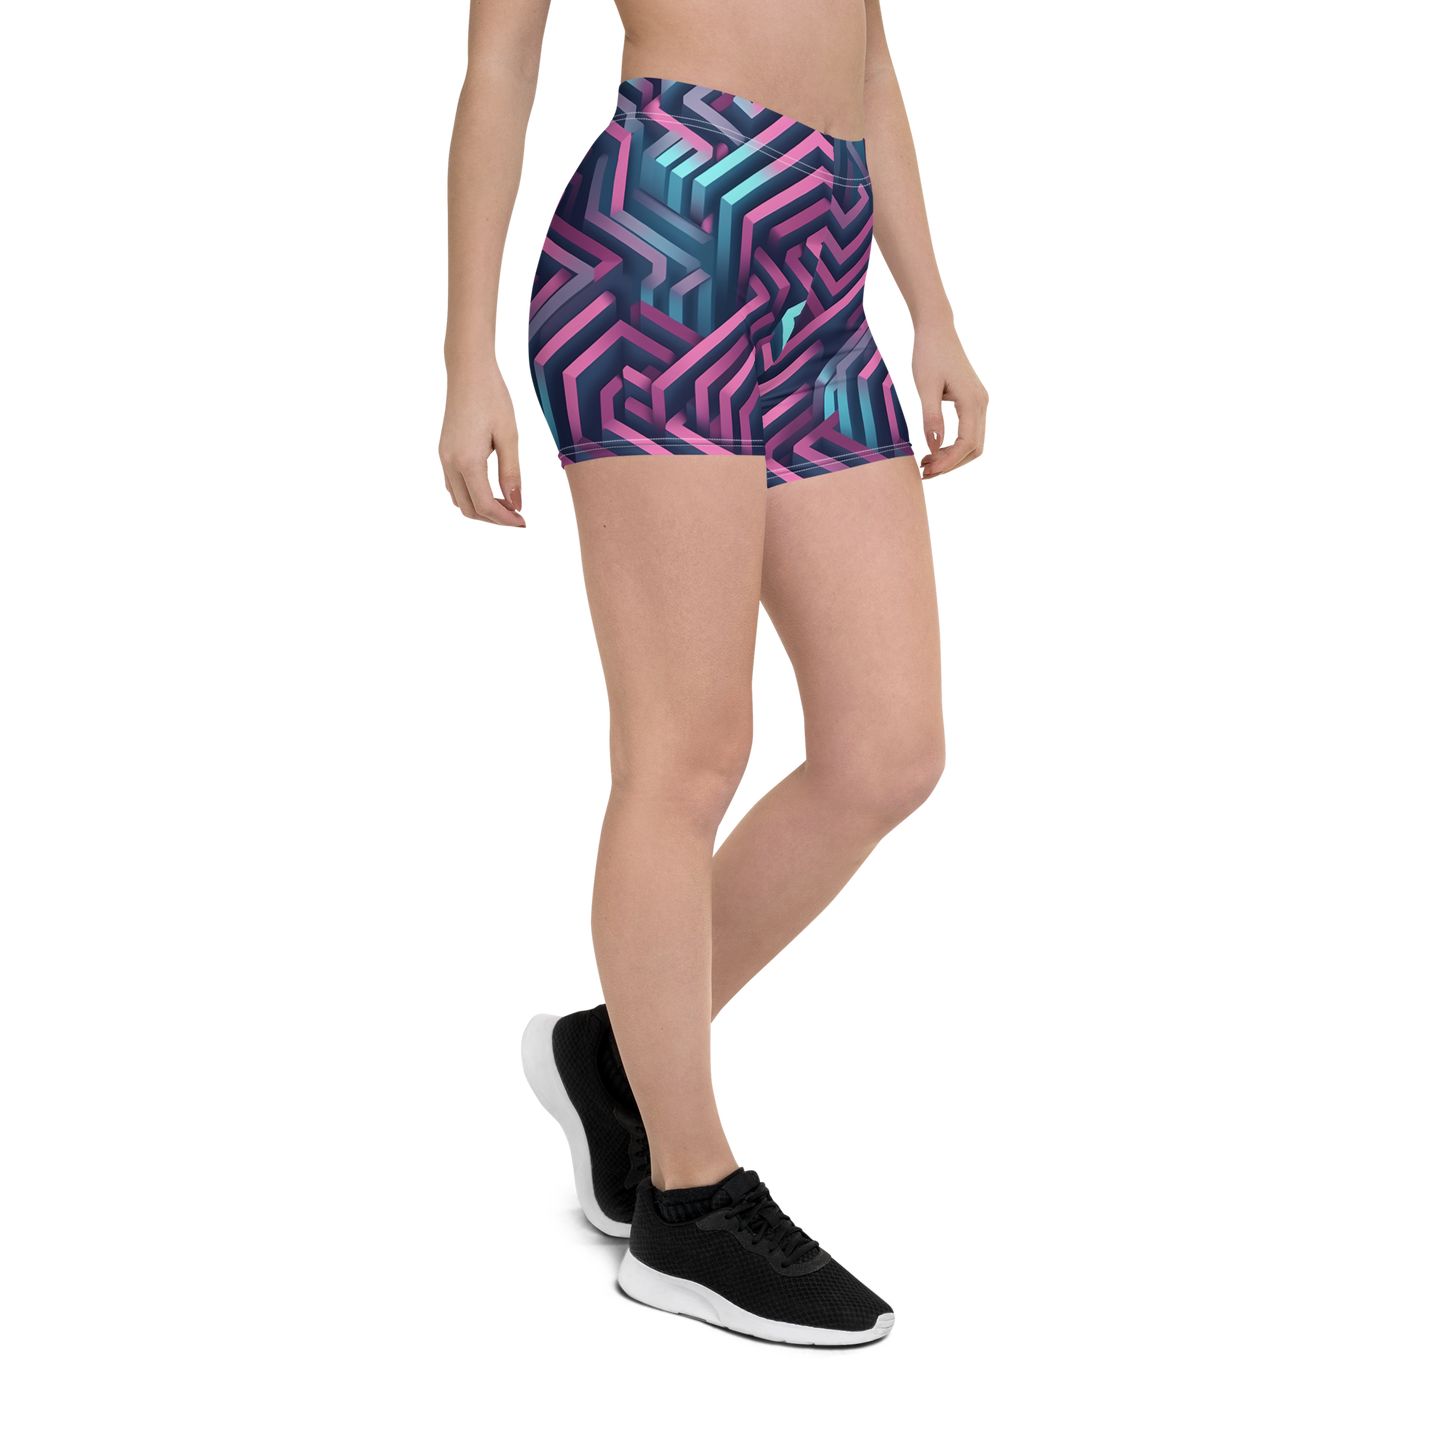 3D Maze Illusion | 3D Patterns | All-Over Print Shorts - #4